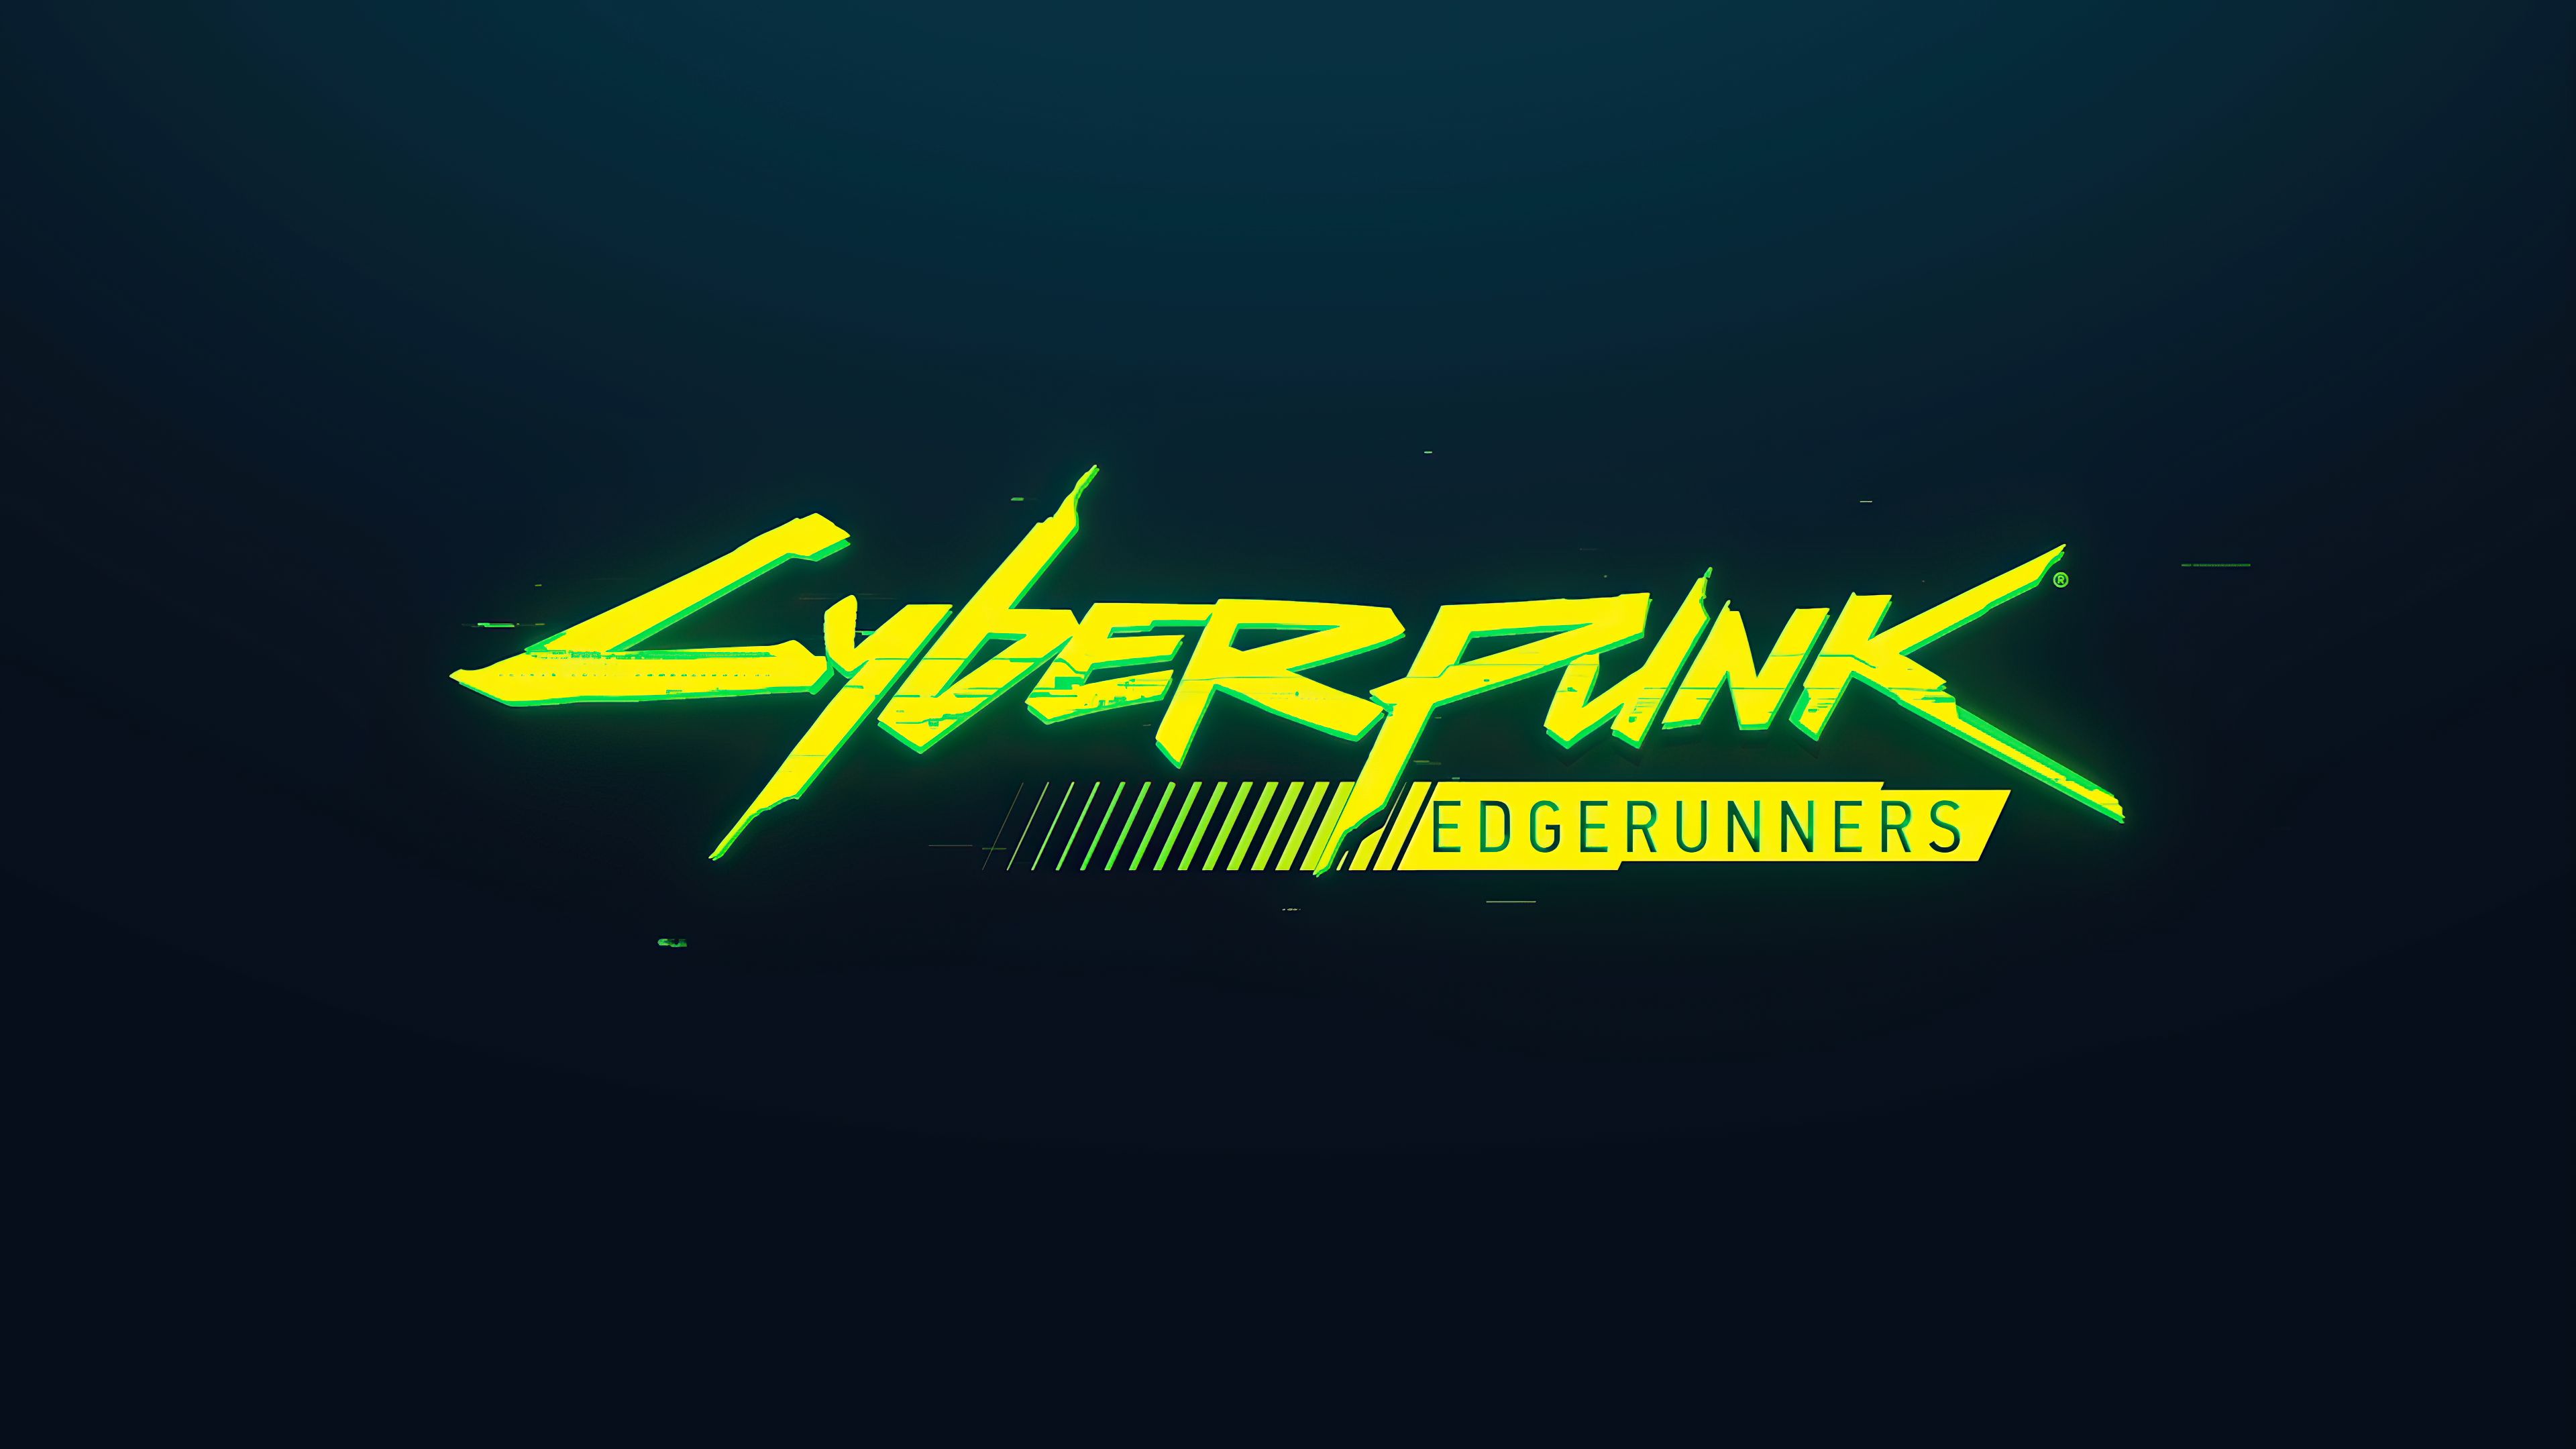 7 David Martinez Cyberpunk Edgerunners Wallpapers for iPhone and Android  by Carla Lucero